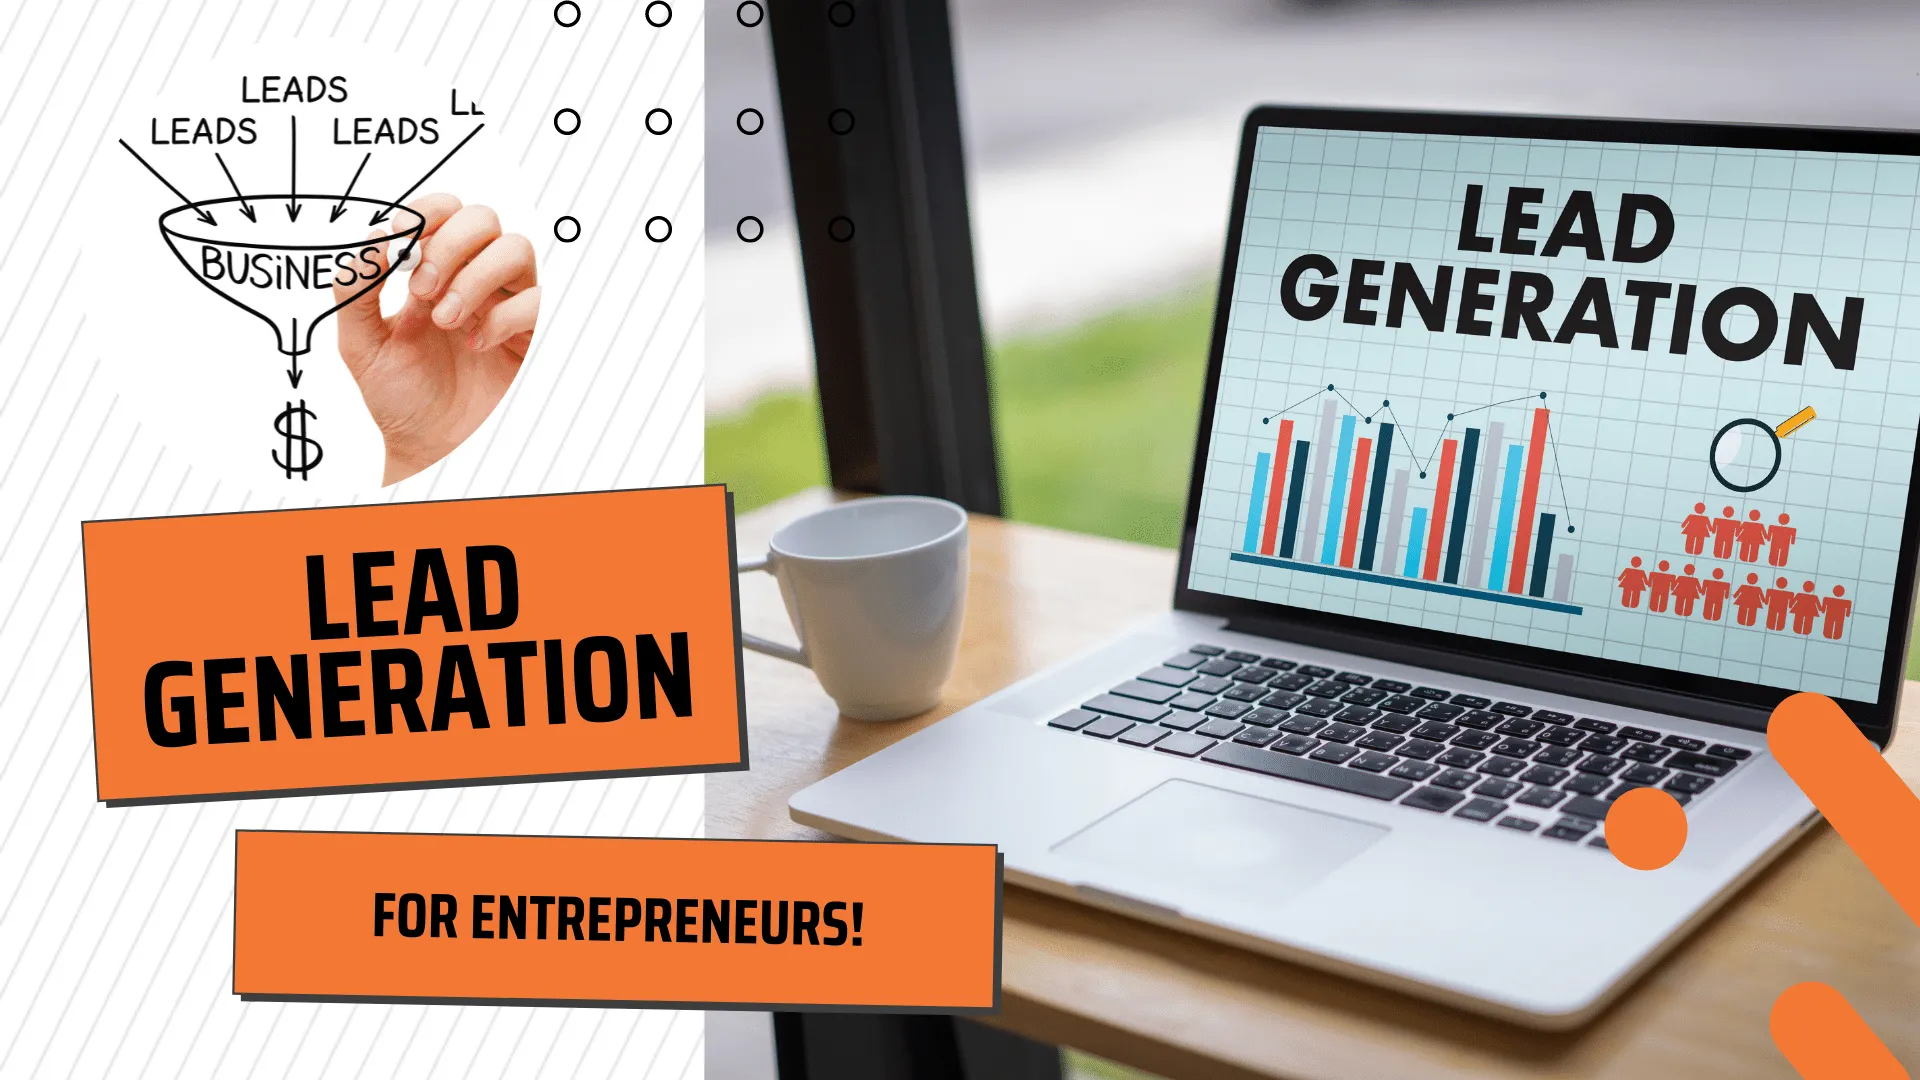 What Is Lead Generation?